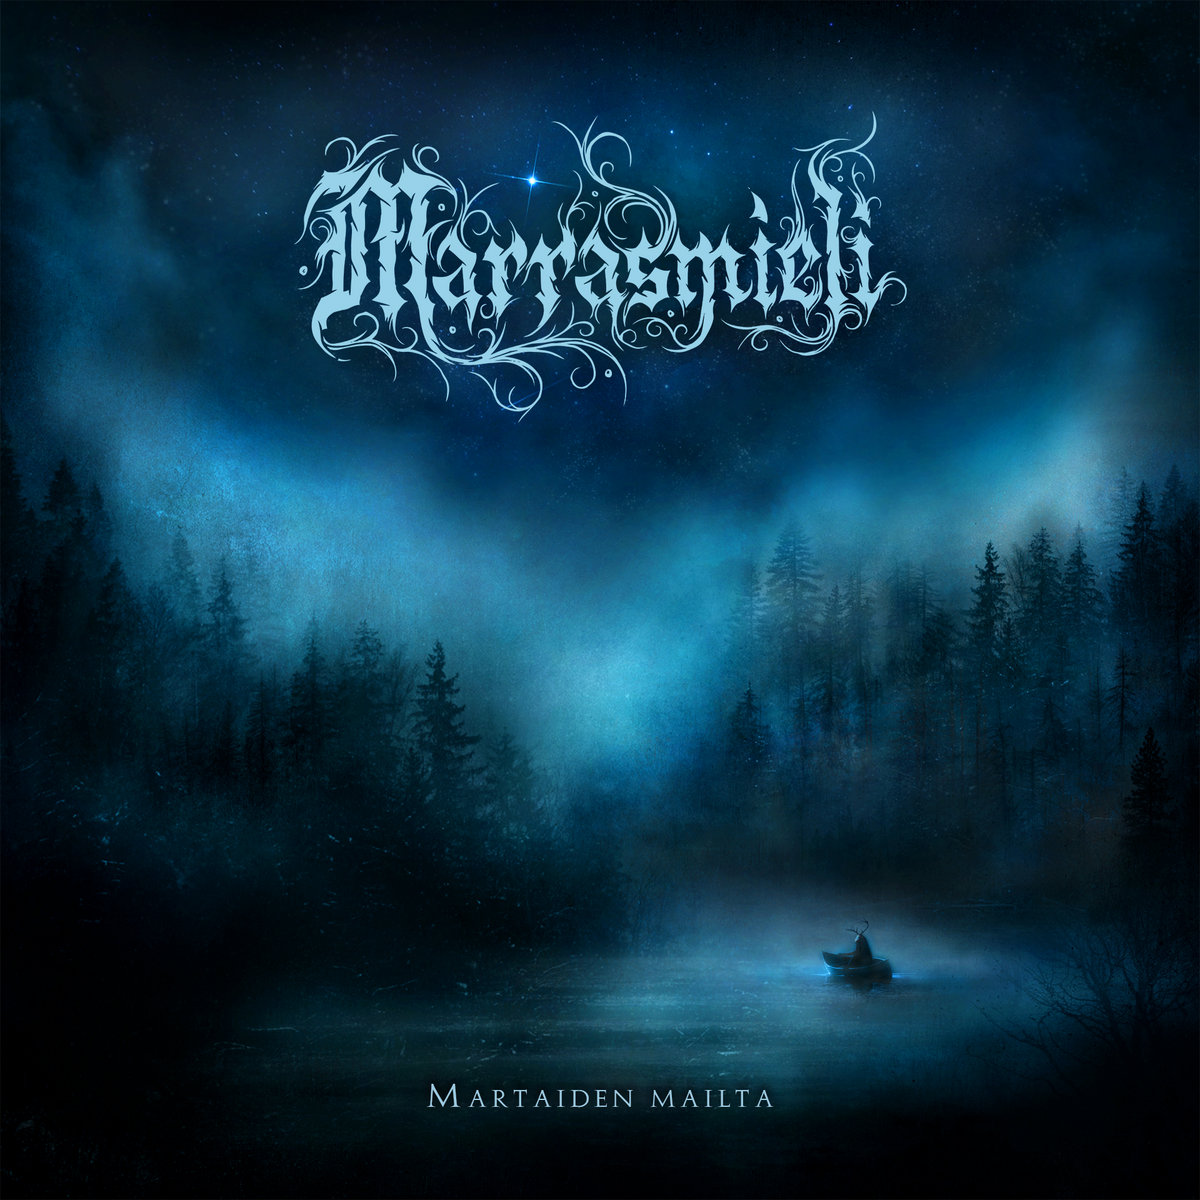 Marrasmiel — The Forest Of My Soul cover artwork